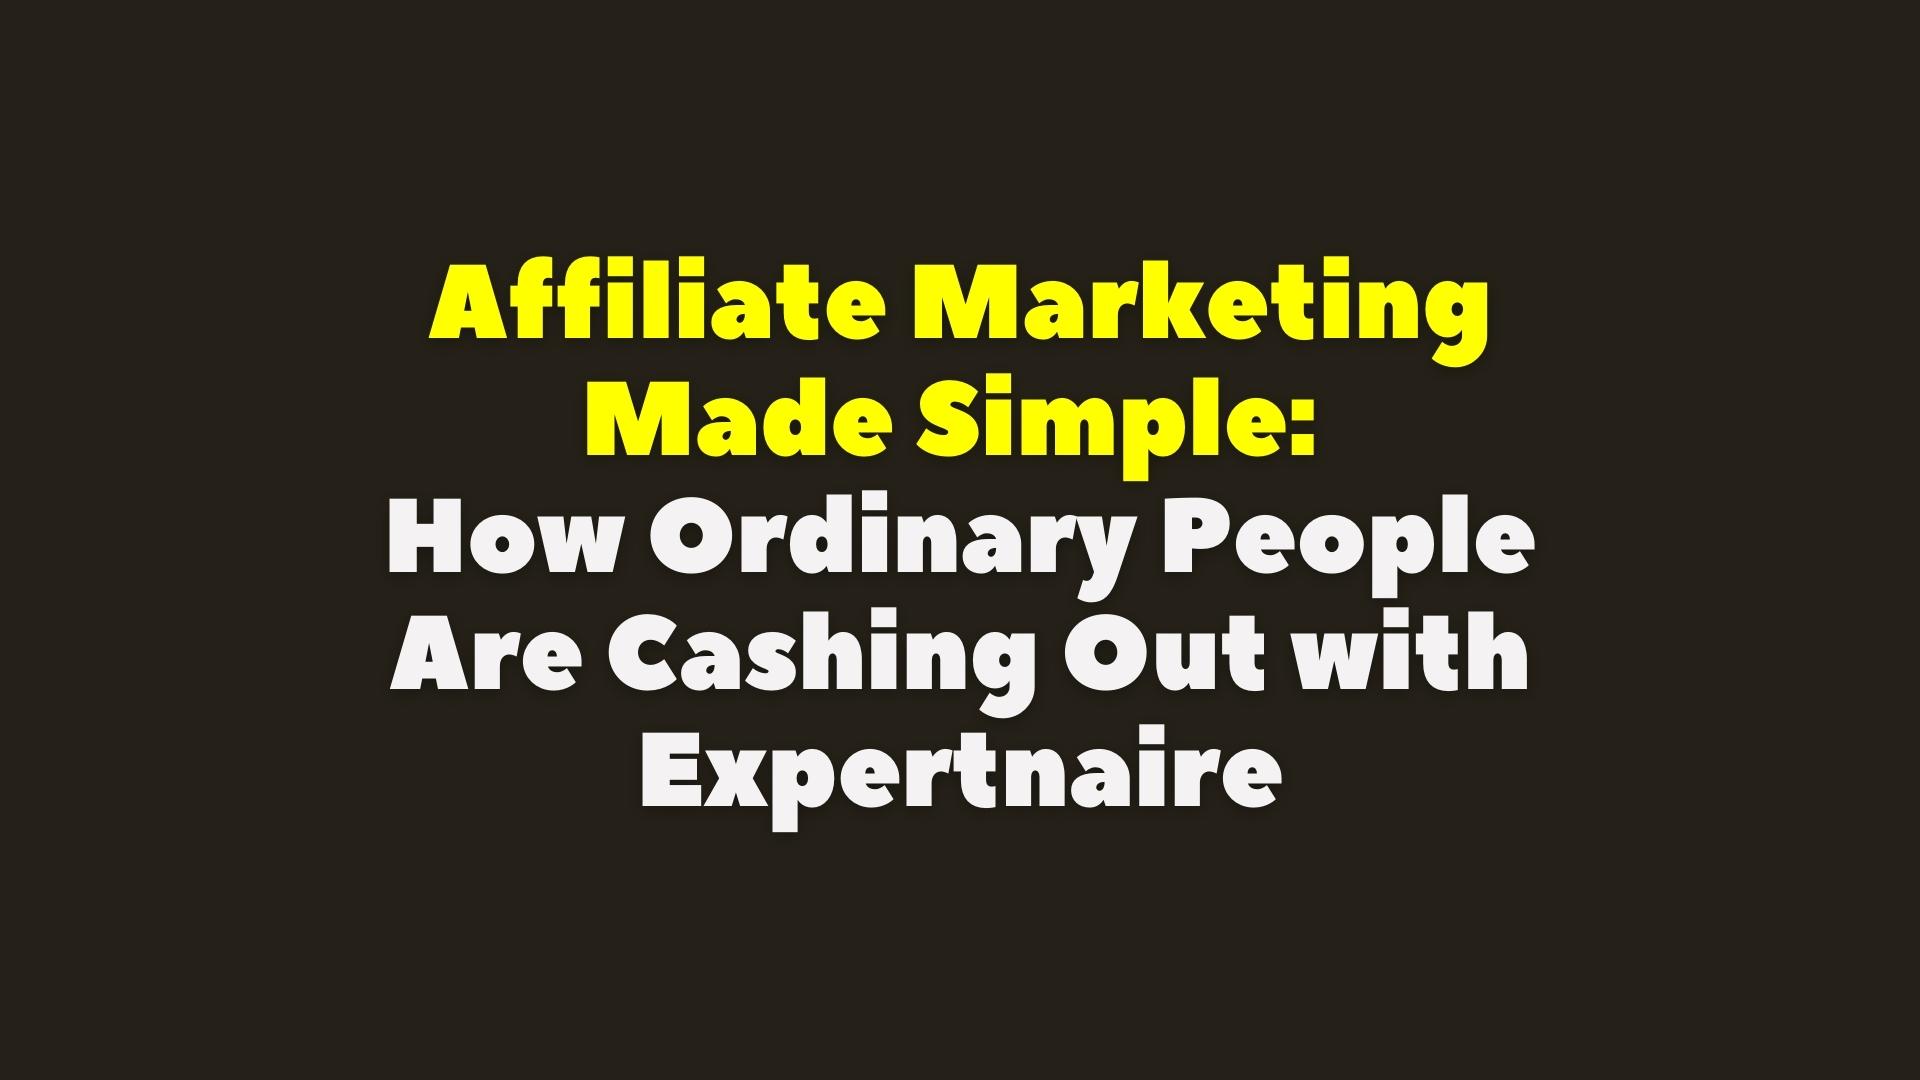 Affiliate Marketing Made Simple: How Ordinary People Are Cashing Out with Expertnaire